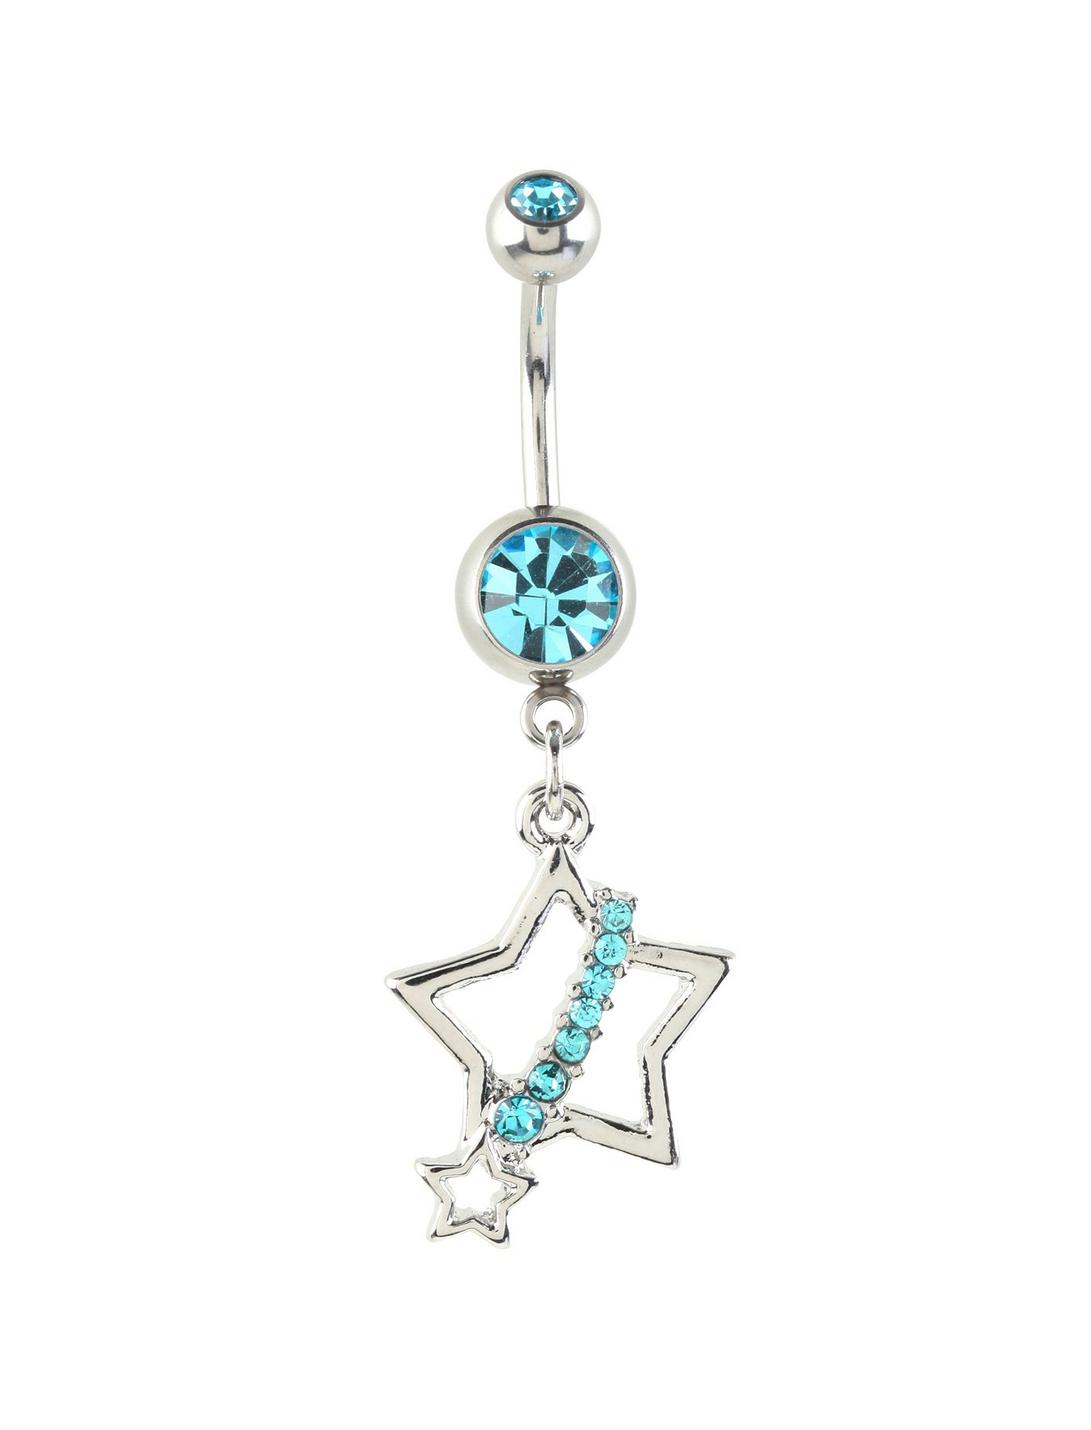 14G Steel Turquoise CZ Shooting Star Navel Barbell, , hi-res